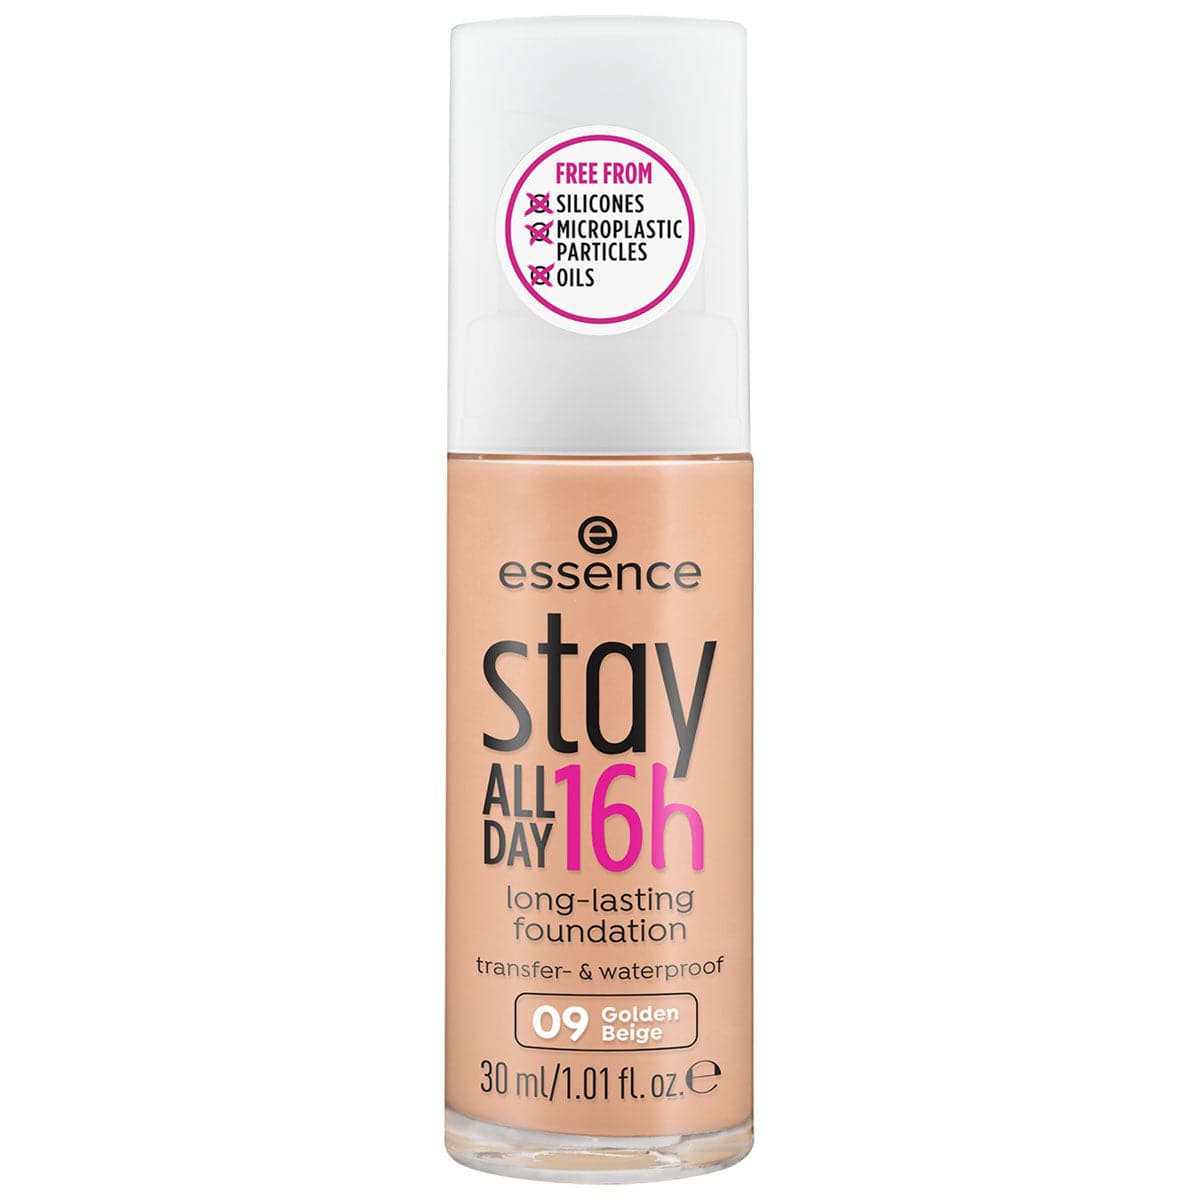 Essence Stay All Day 16H Long-Lasting Make-Up - 09 Golden Beige